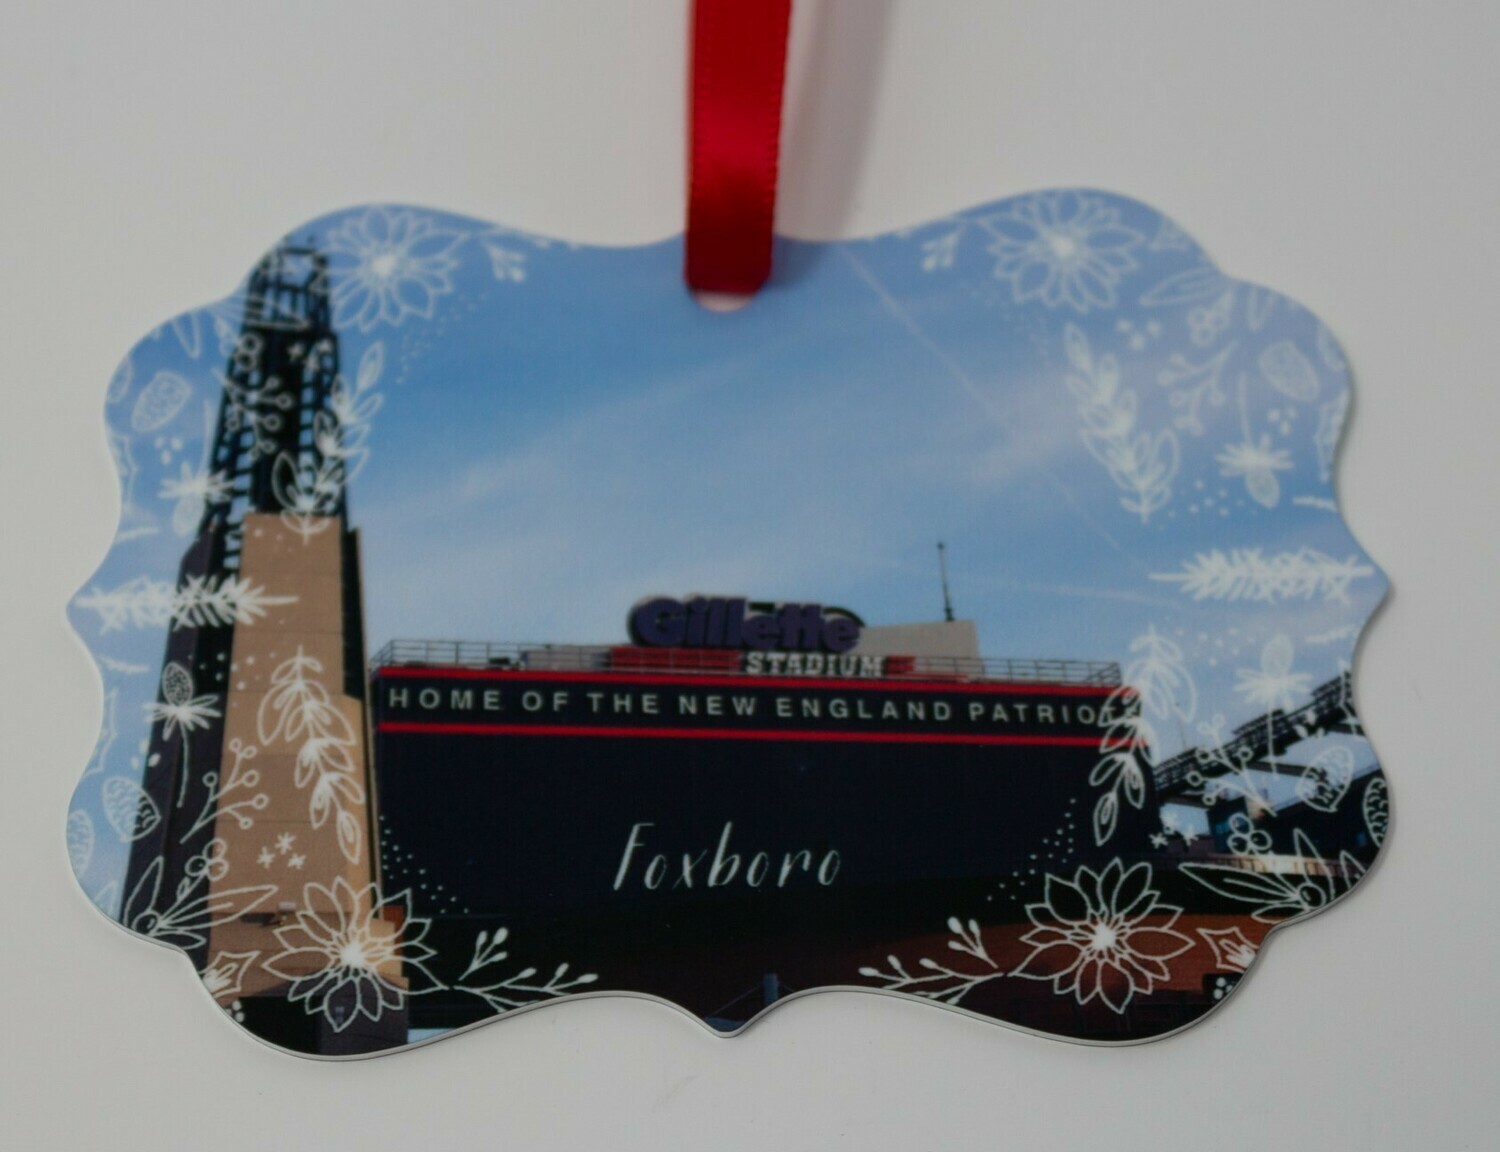 ​3"x 3" Ornate 2-sided Metal Ornament With Image of the old Gillette Stadium Lighthouse.